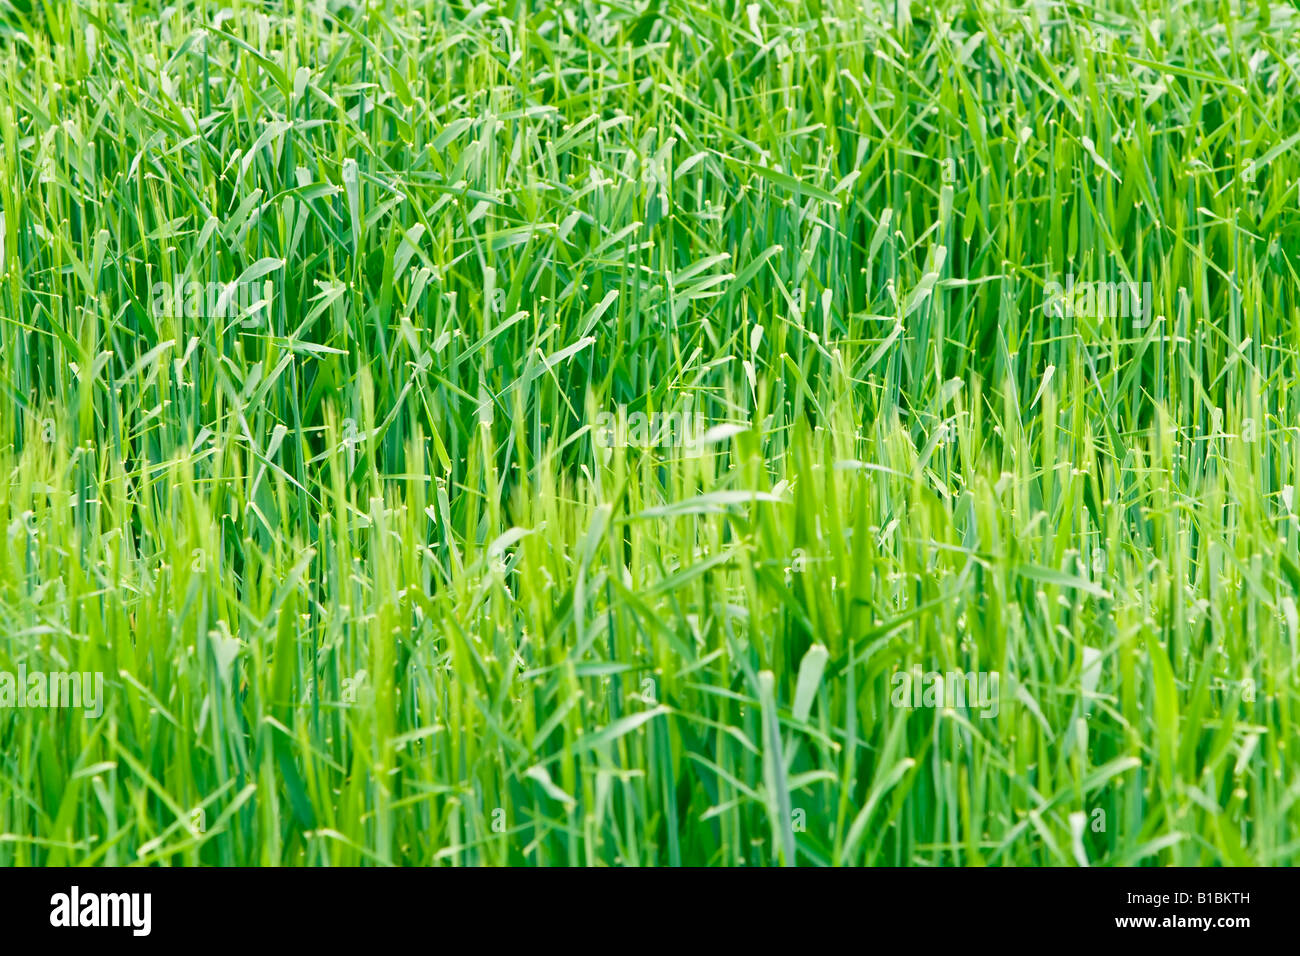 detail of a green field shallow dof Stock Photo